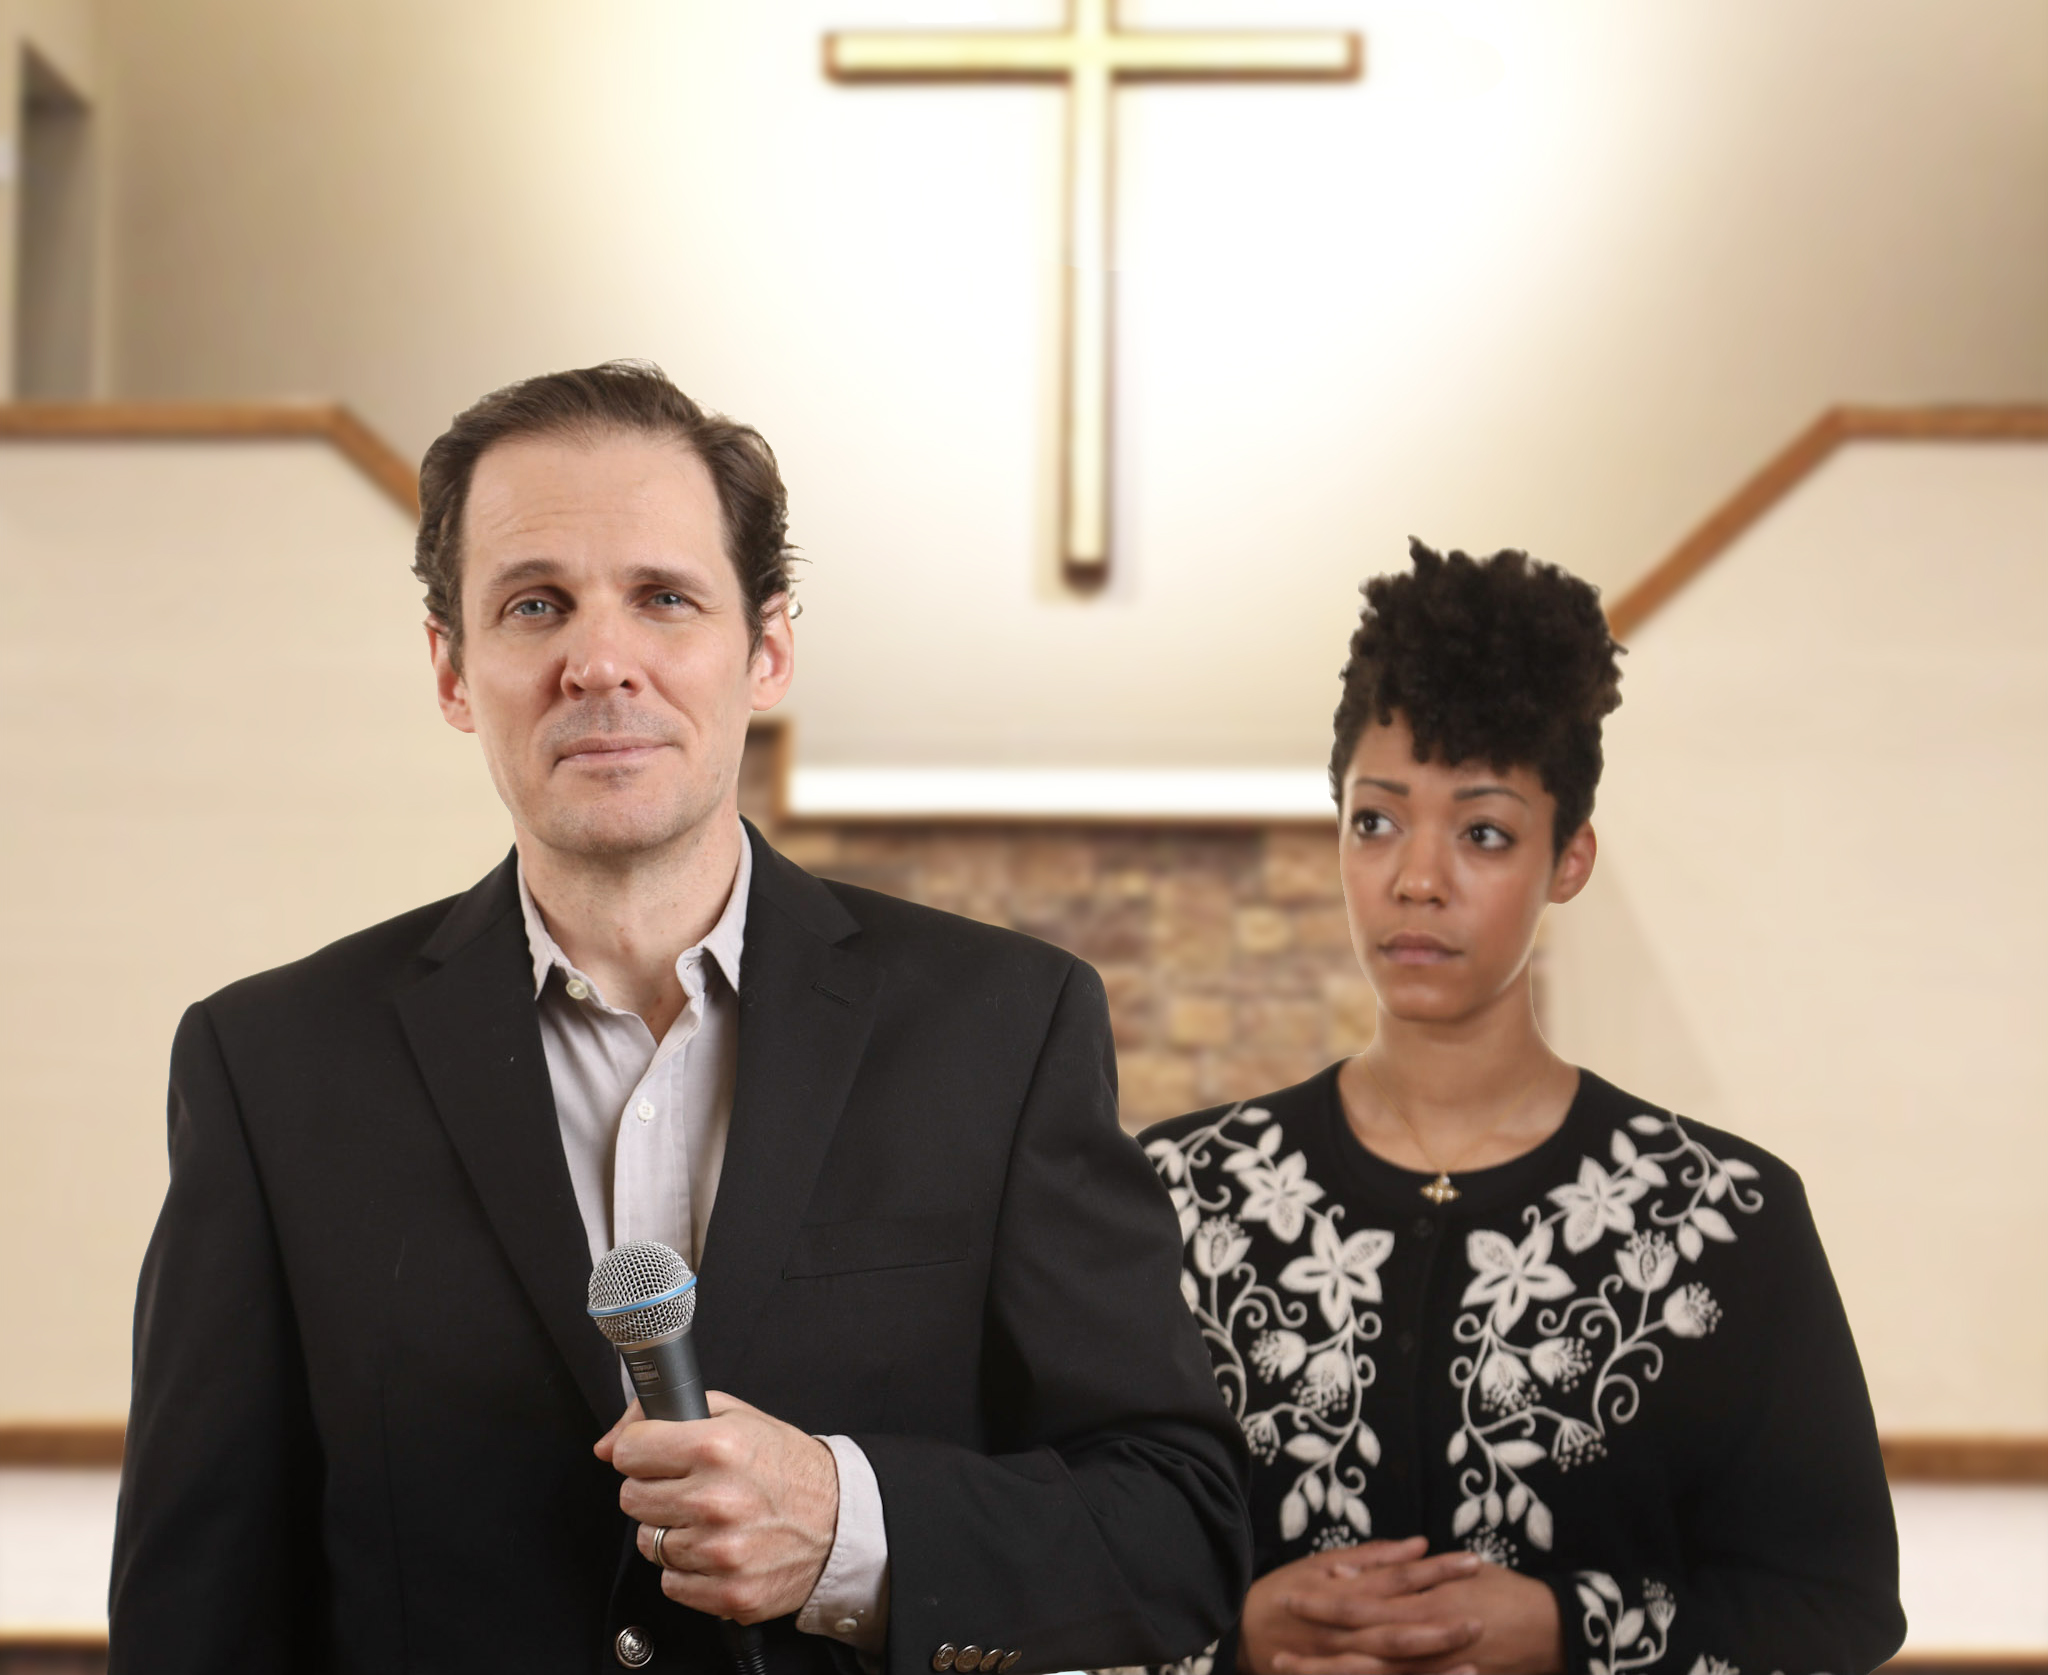 "The Christians" features Joey Collins as Pastor and Nemuna Cessay as Pastor's Wife. The two also have major roles in "Tartuffe."